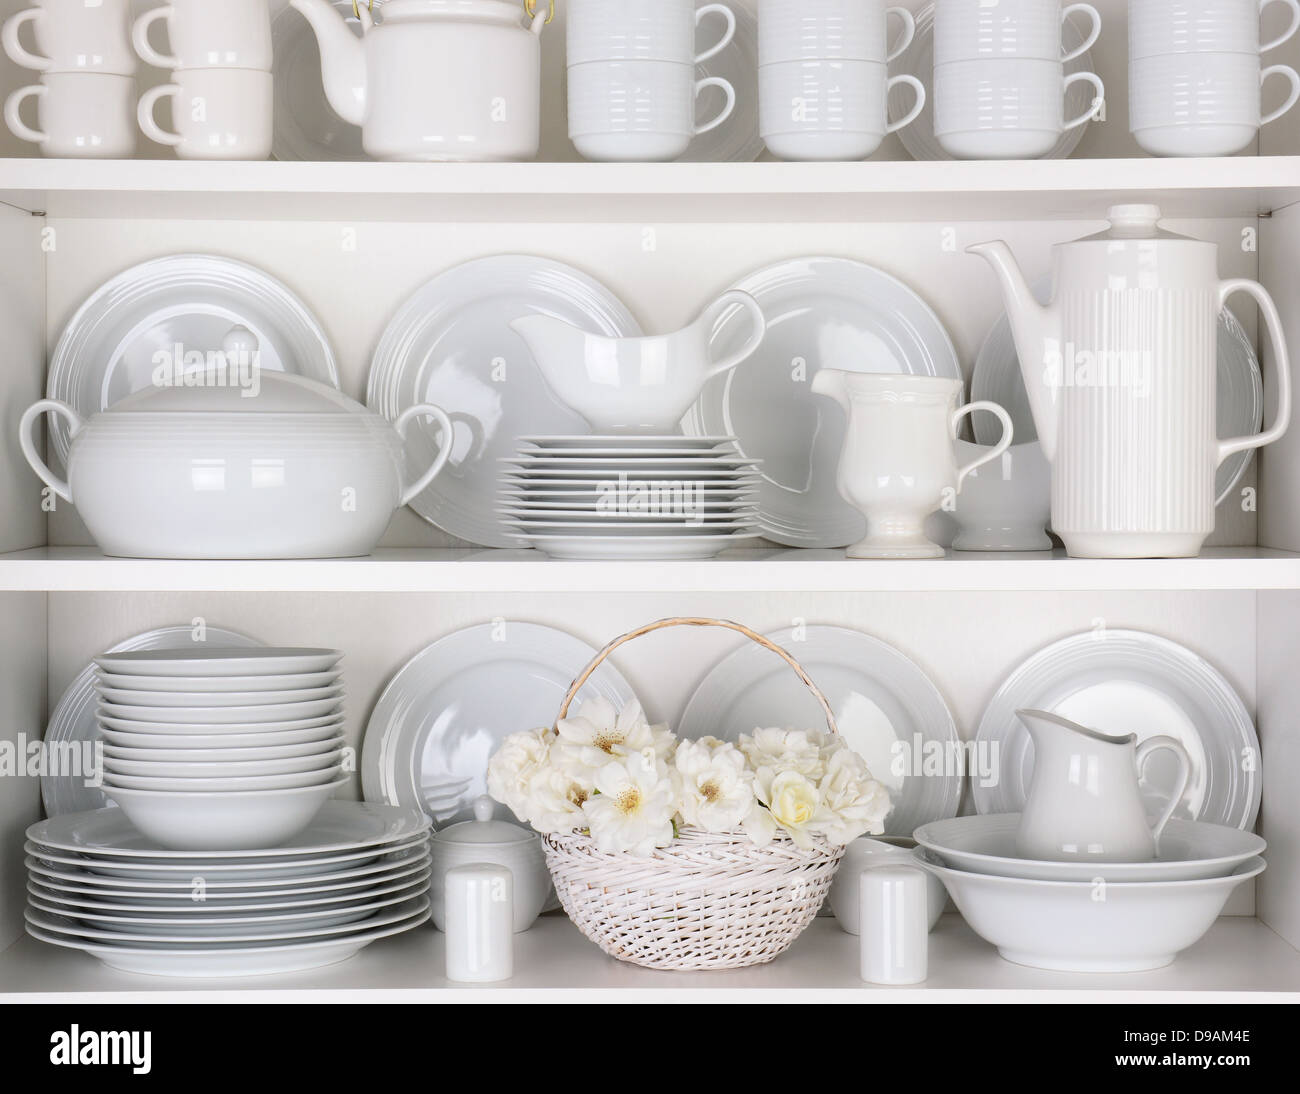 Closeup of white plates and dinnerware in a cupboard. A basket of white roses is centered on the bottom shelf. Stock Photo